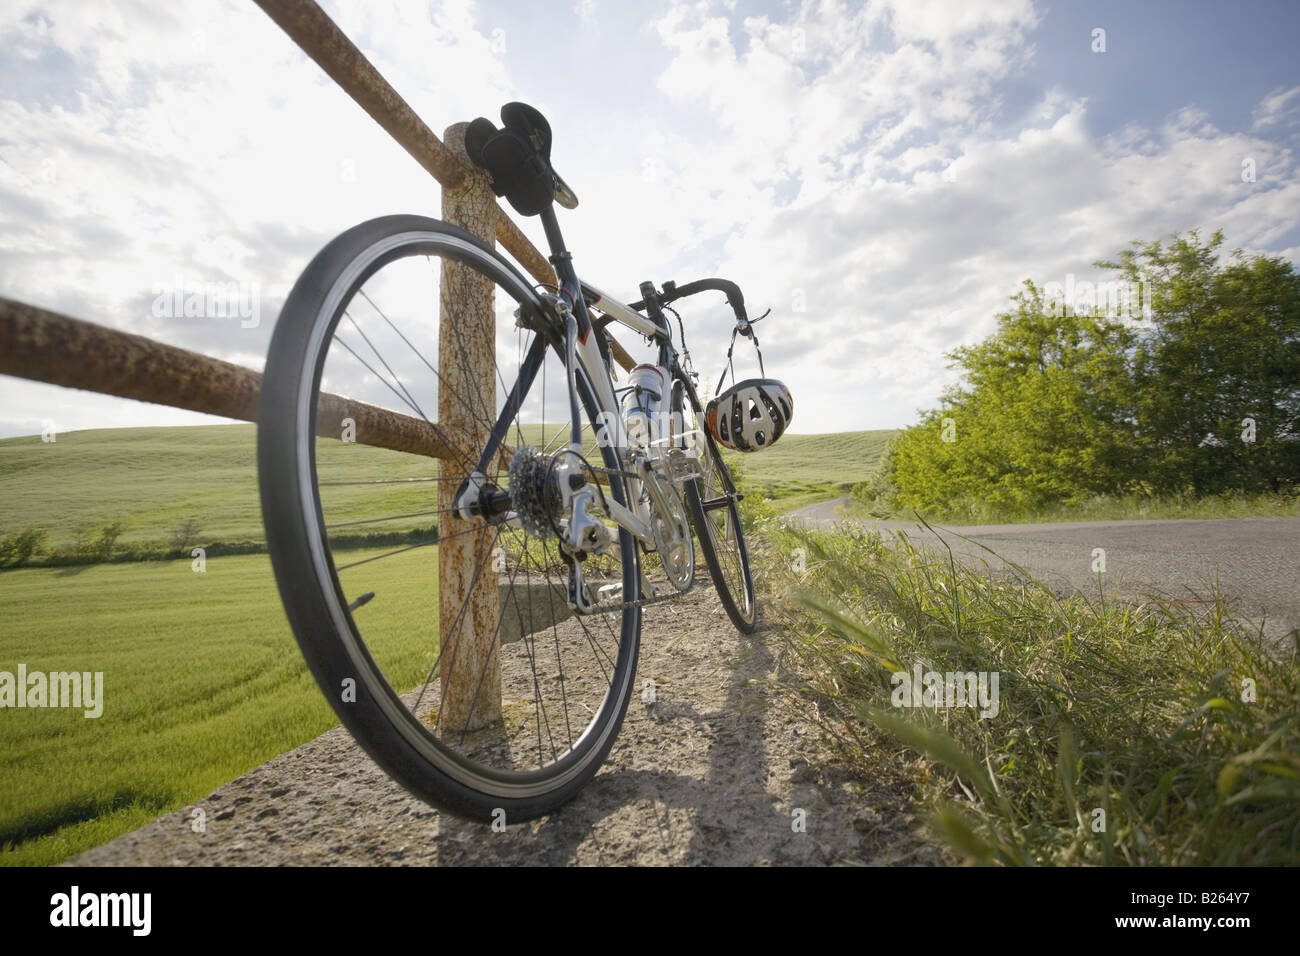 Racer bike parked on roadside by the railing Stock Photo